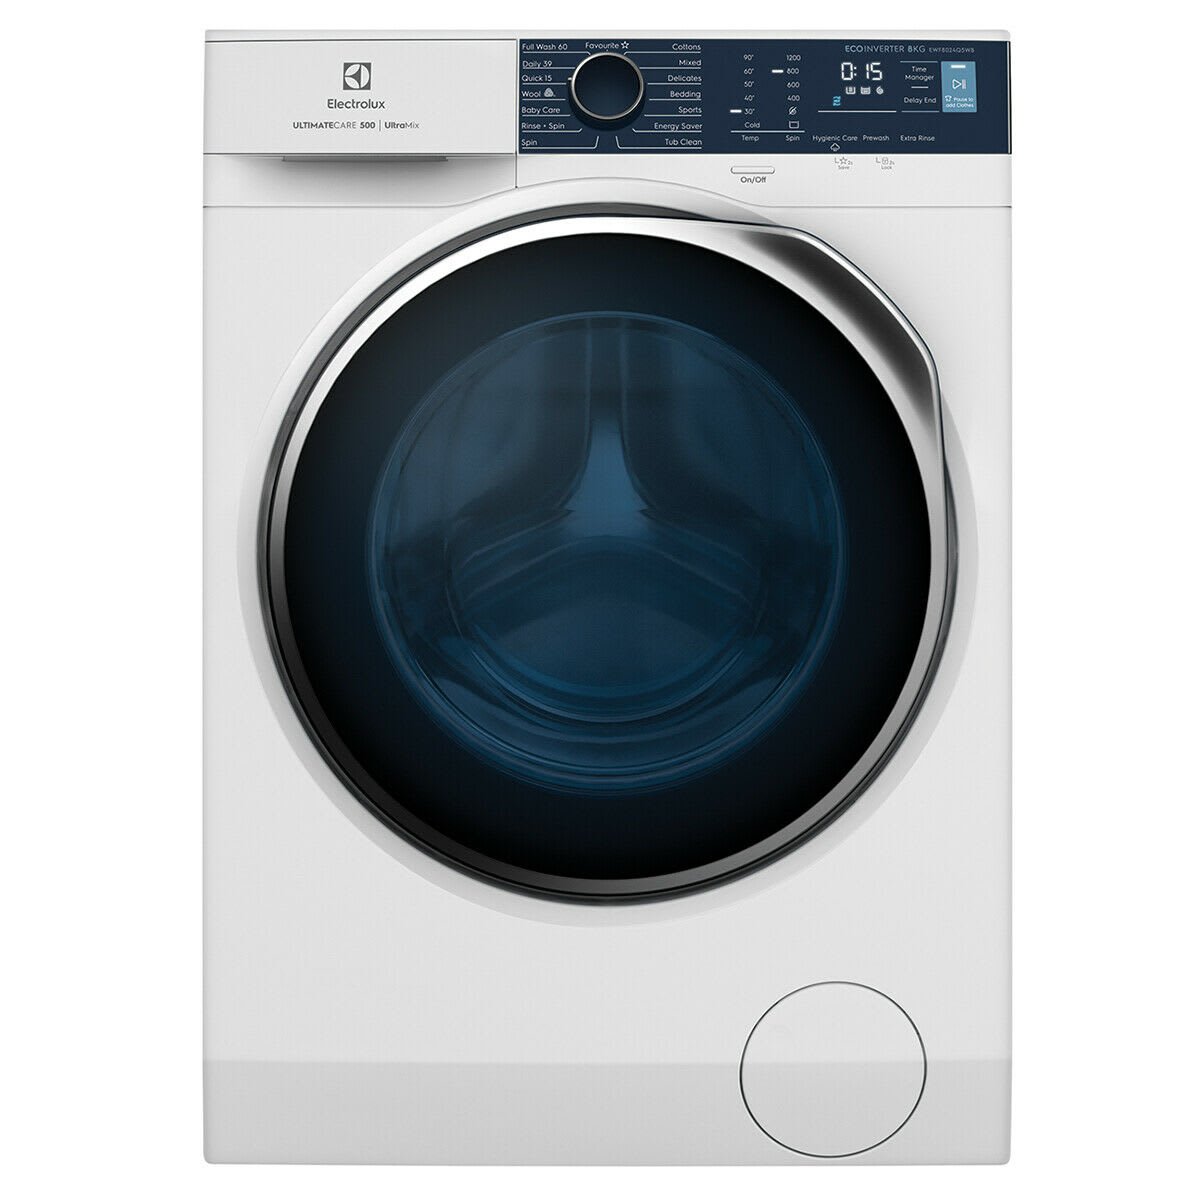 Electrolux Ultimate Care 500 Front Load Washing Machine_1